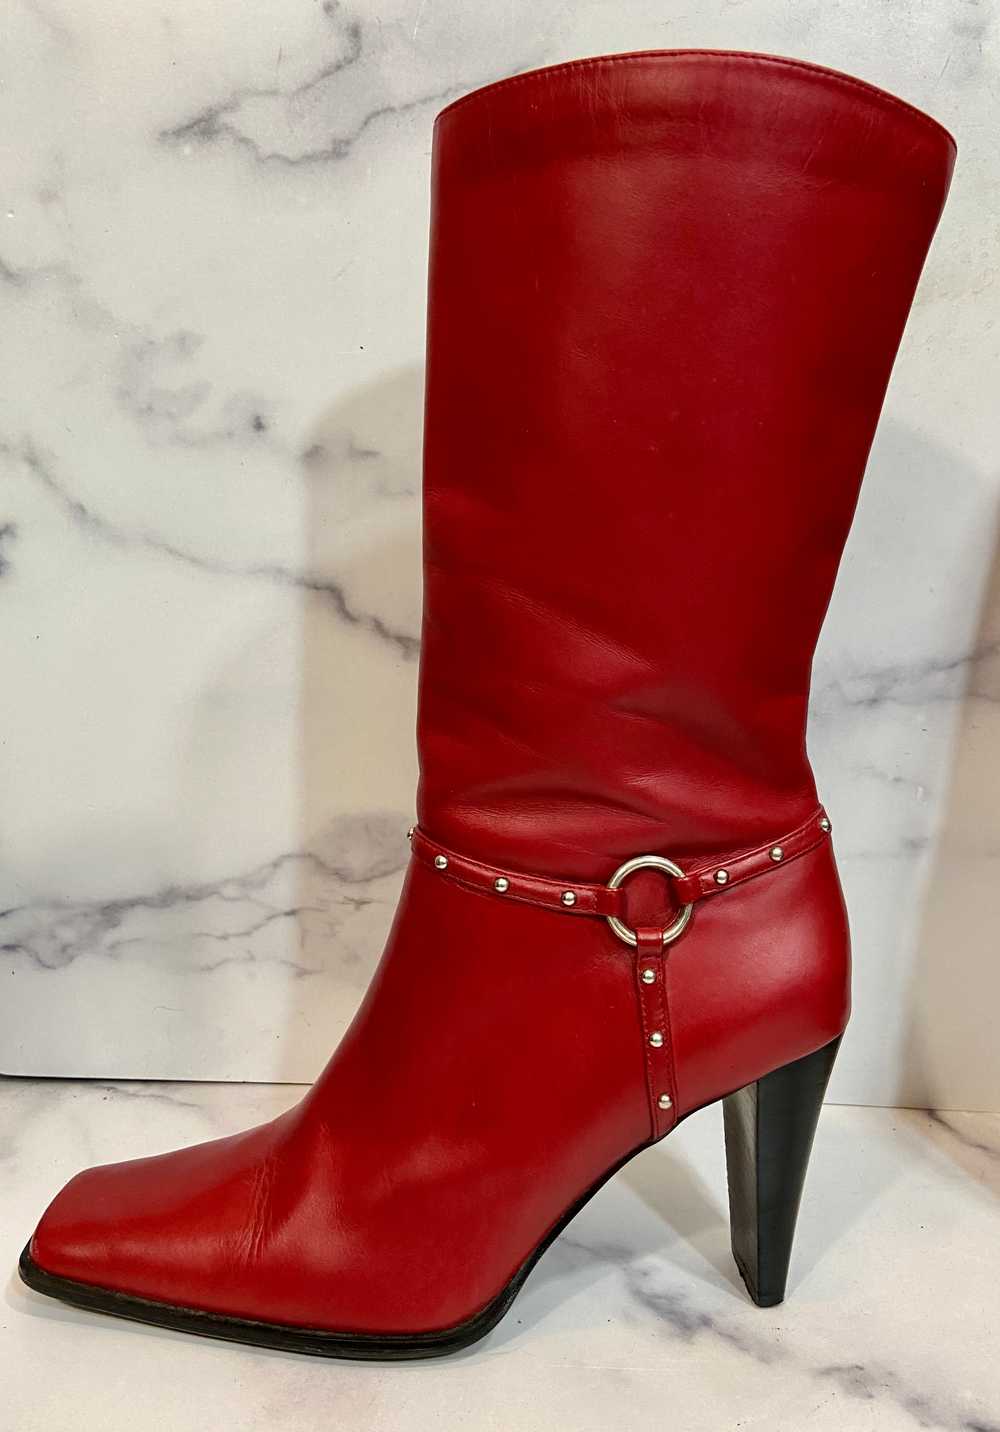 Motor Blaze red leather boots - image 8